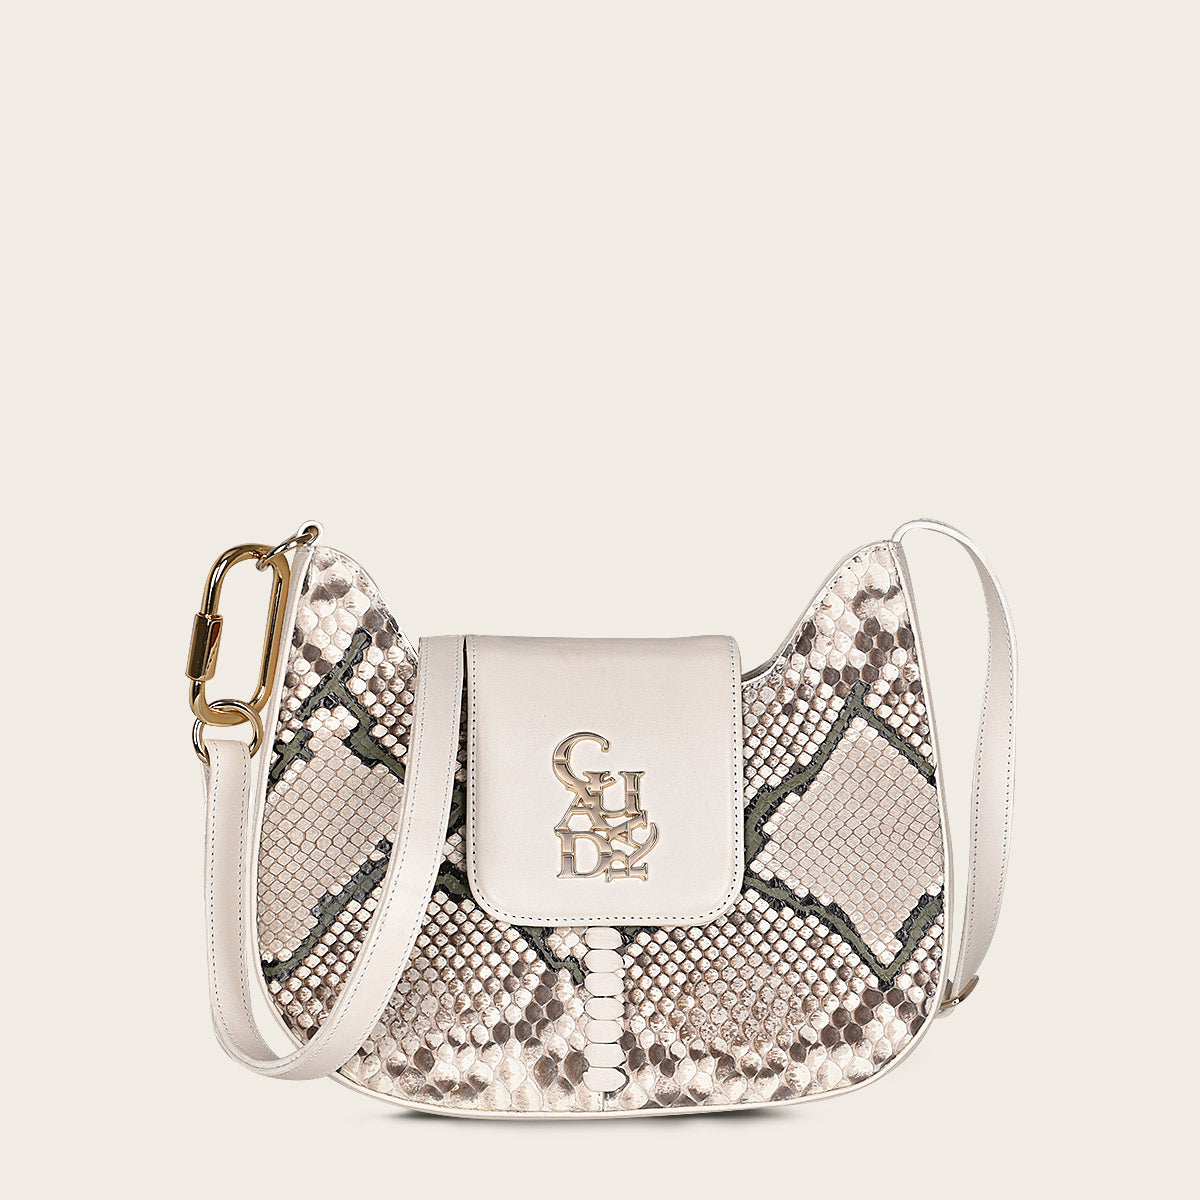 White exotic leather shoulder bag with handmade interweaving detail